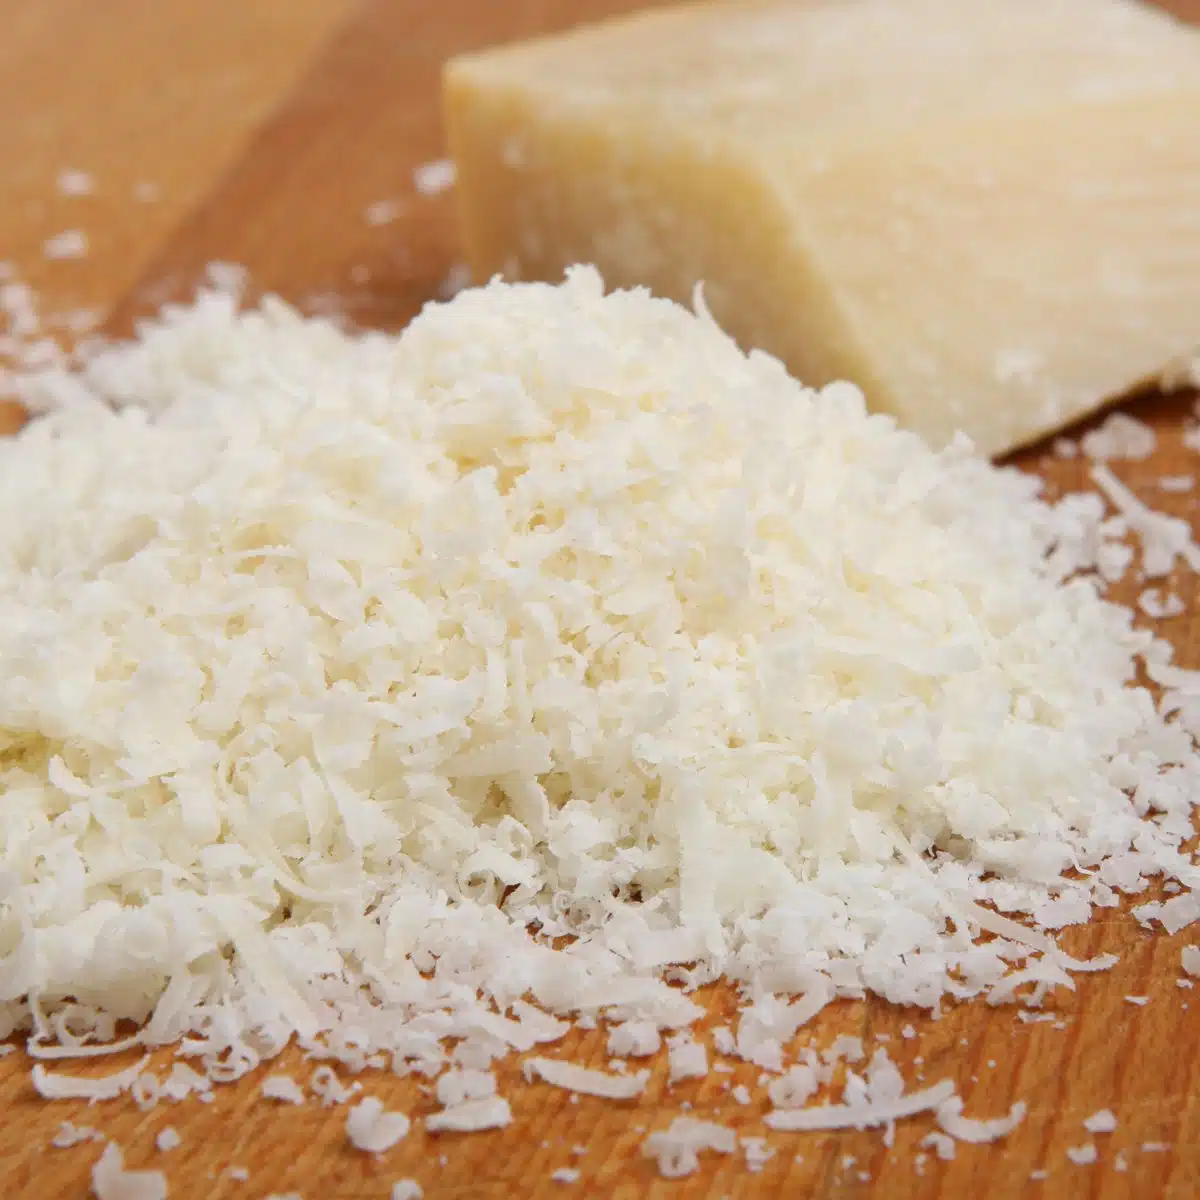 Square image of grated Romano cheese.